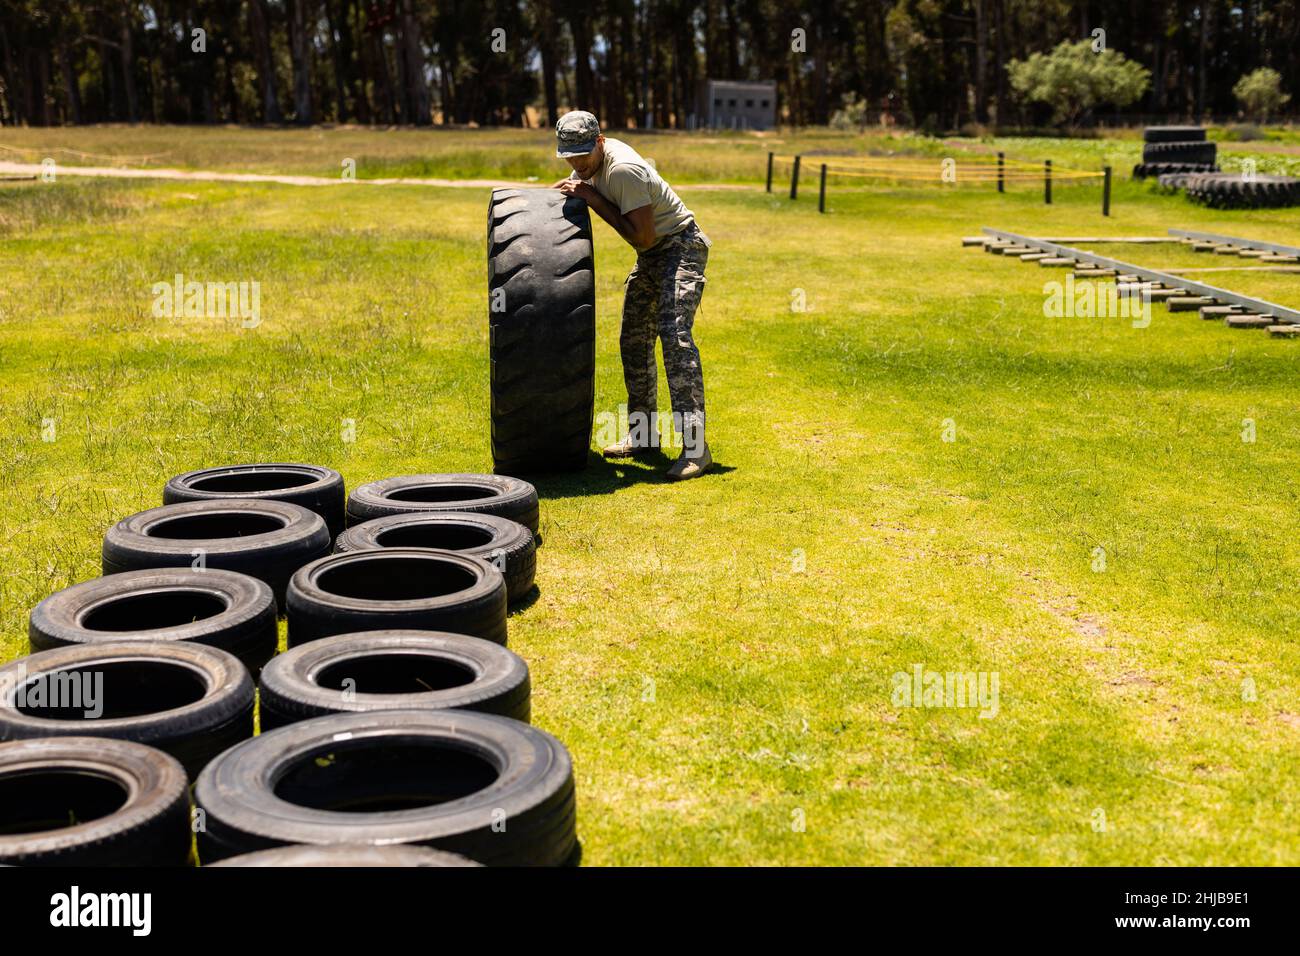 Male soldier rolling a tire during obstacle course at boot camp Stock Photo